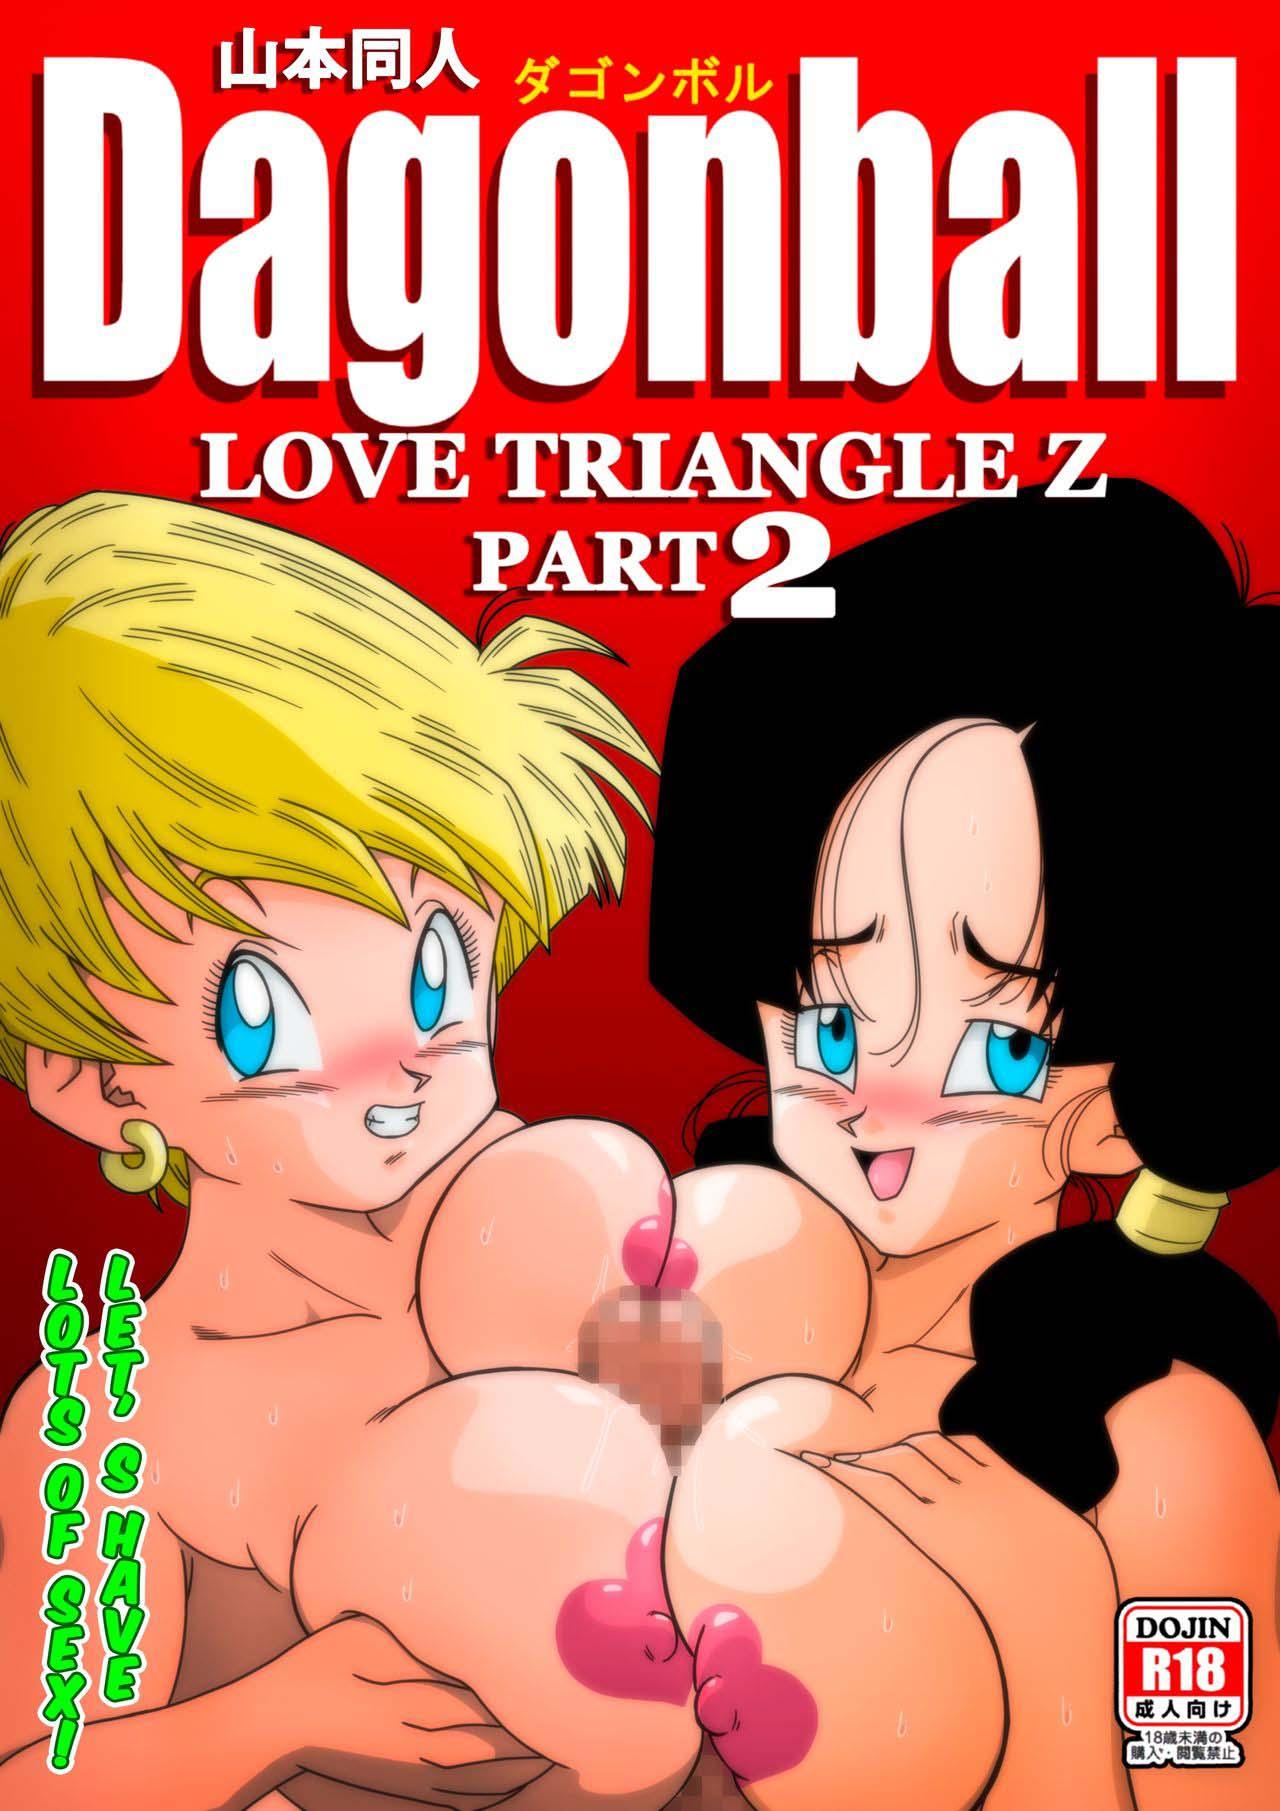 Pale LOVE TRIANGLE Z Part 2 - Dragon ball z Gay Massage - Picture 1